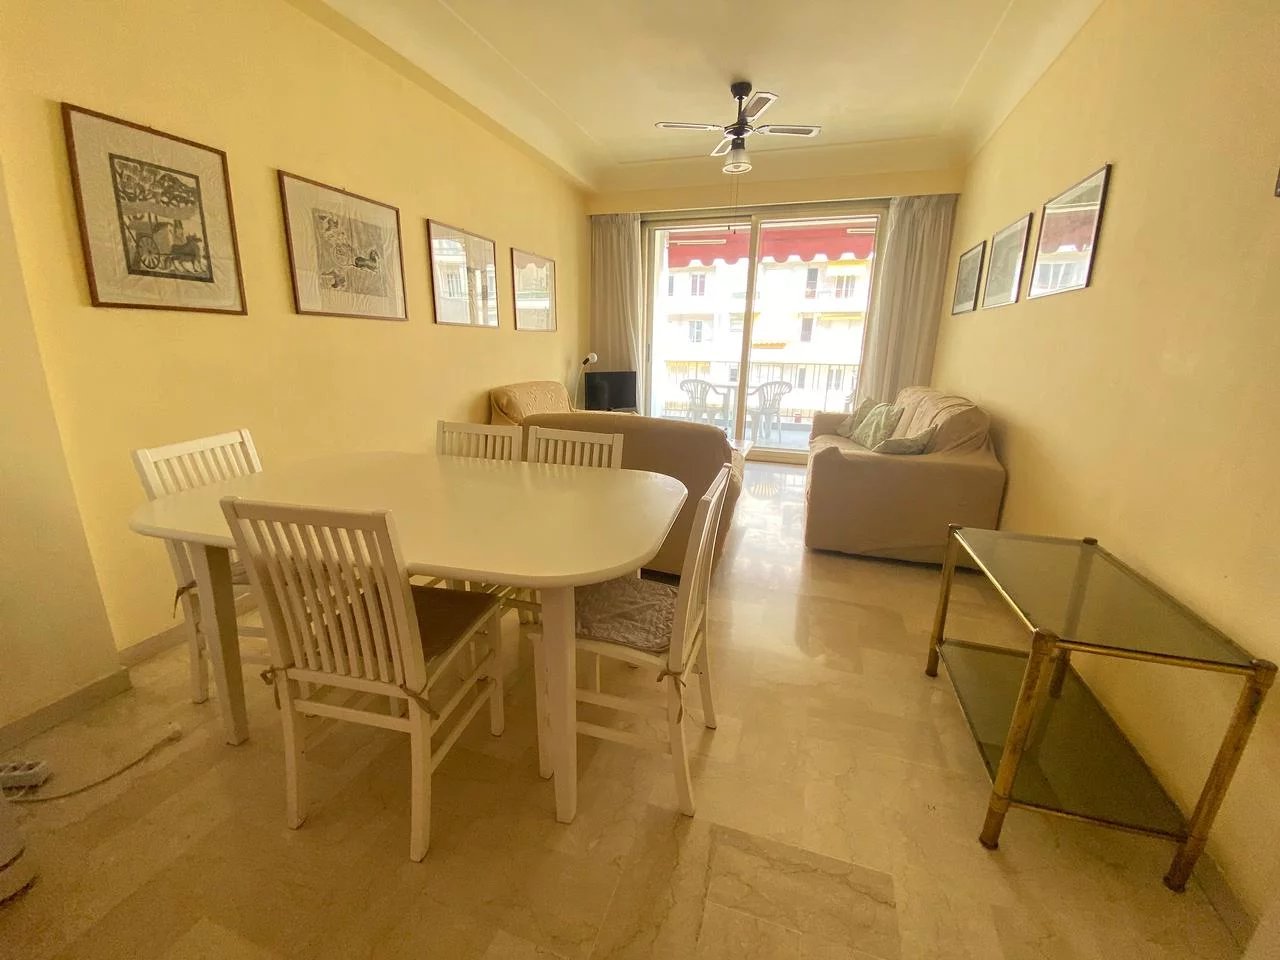 Appartement  3 Rooms 62.4m2  for sale   290 000 €